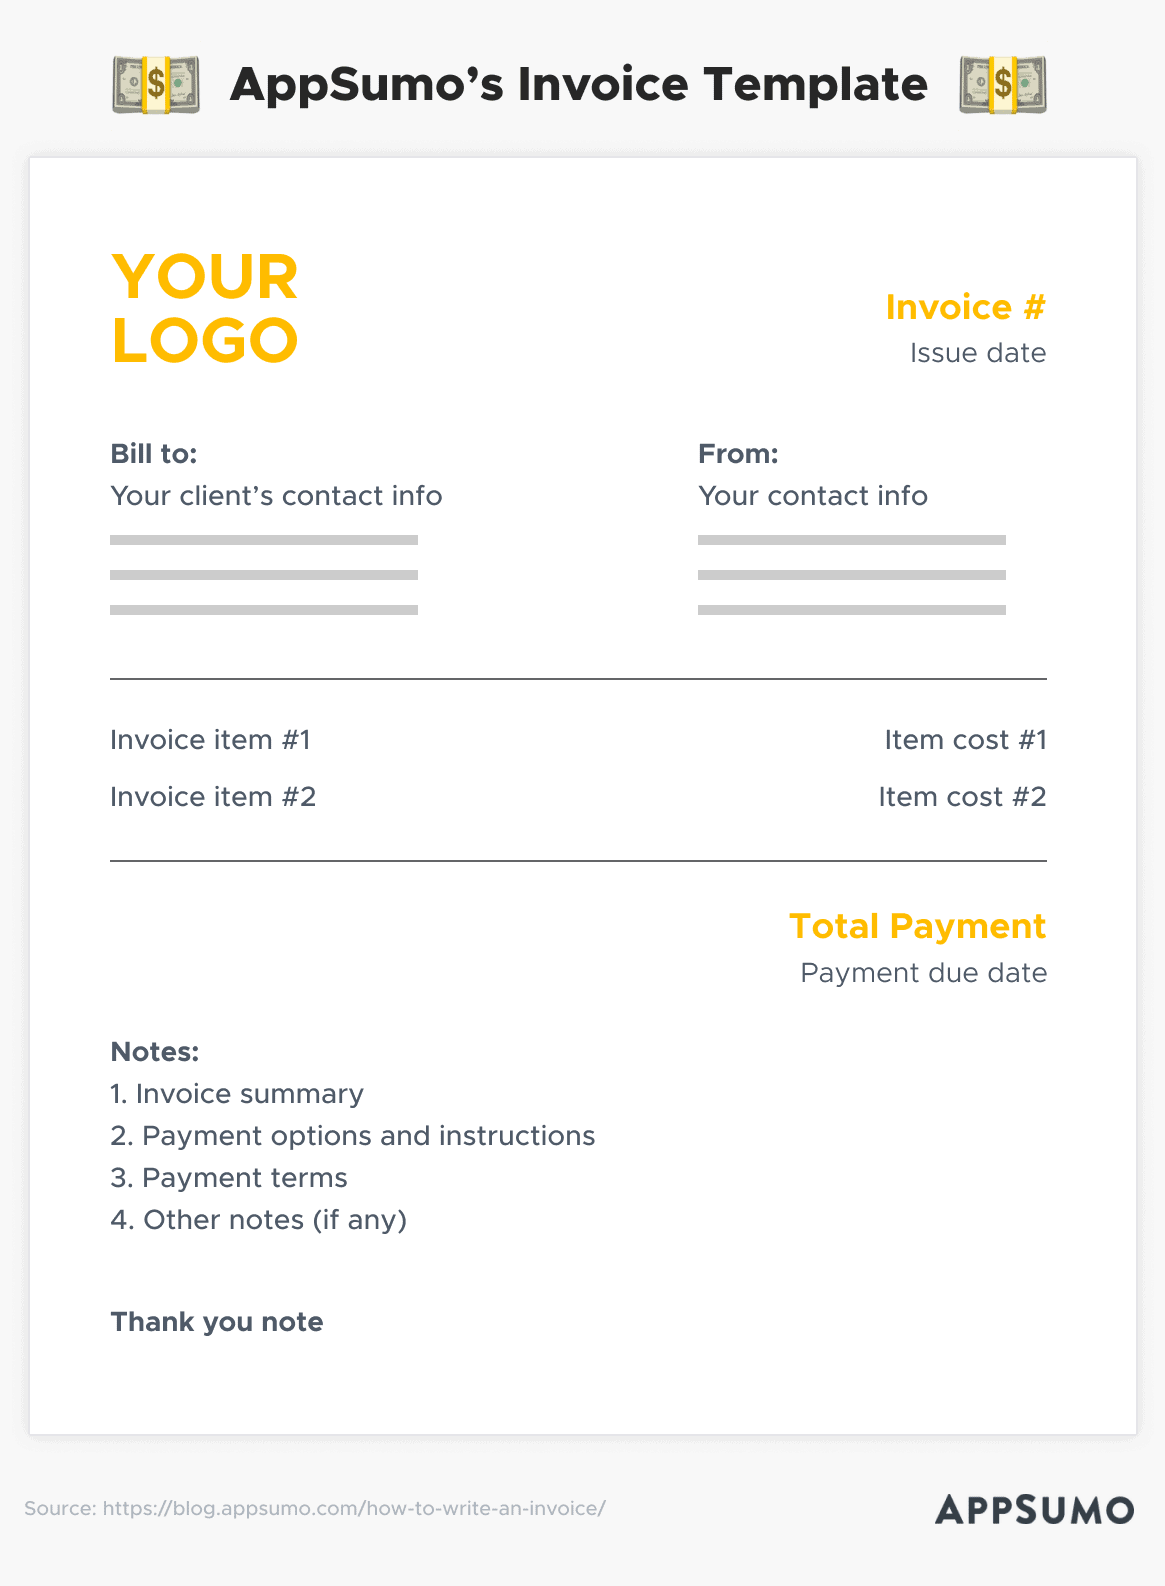 How to write an invoice - Appsumo's Invoice Template